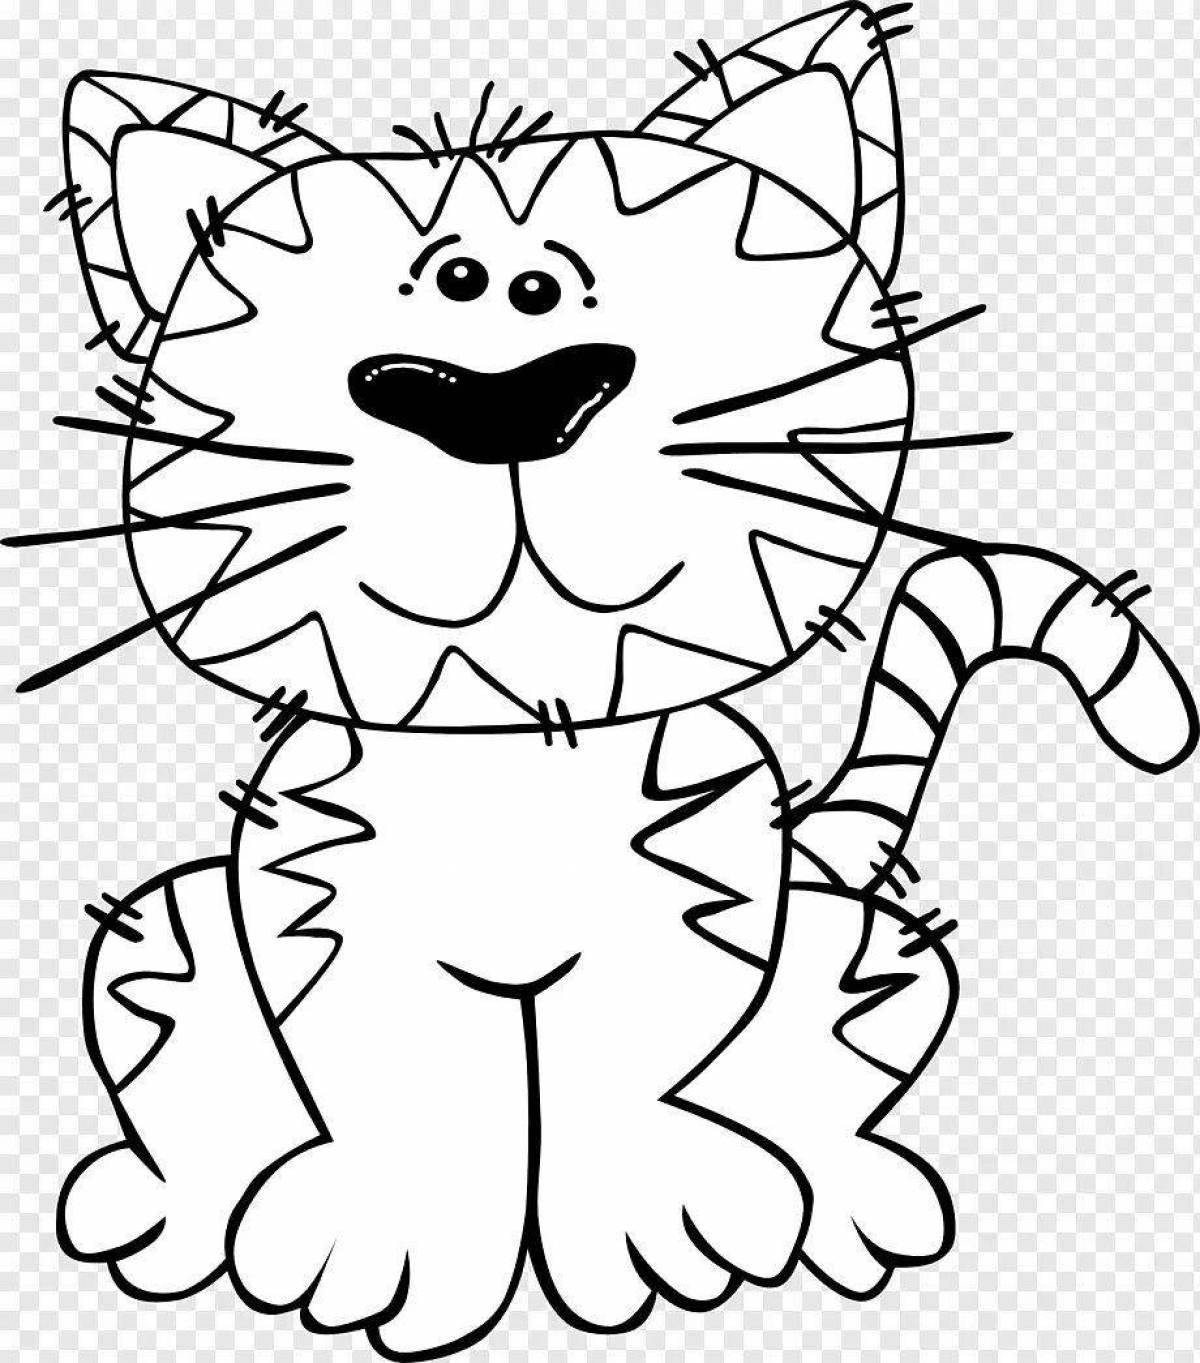 Coloring book bright outline of a cat